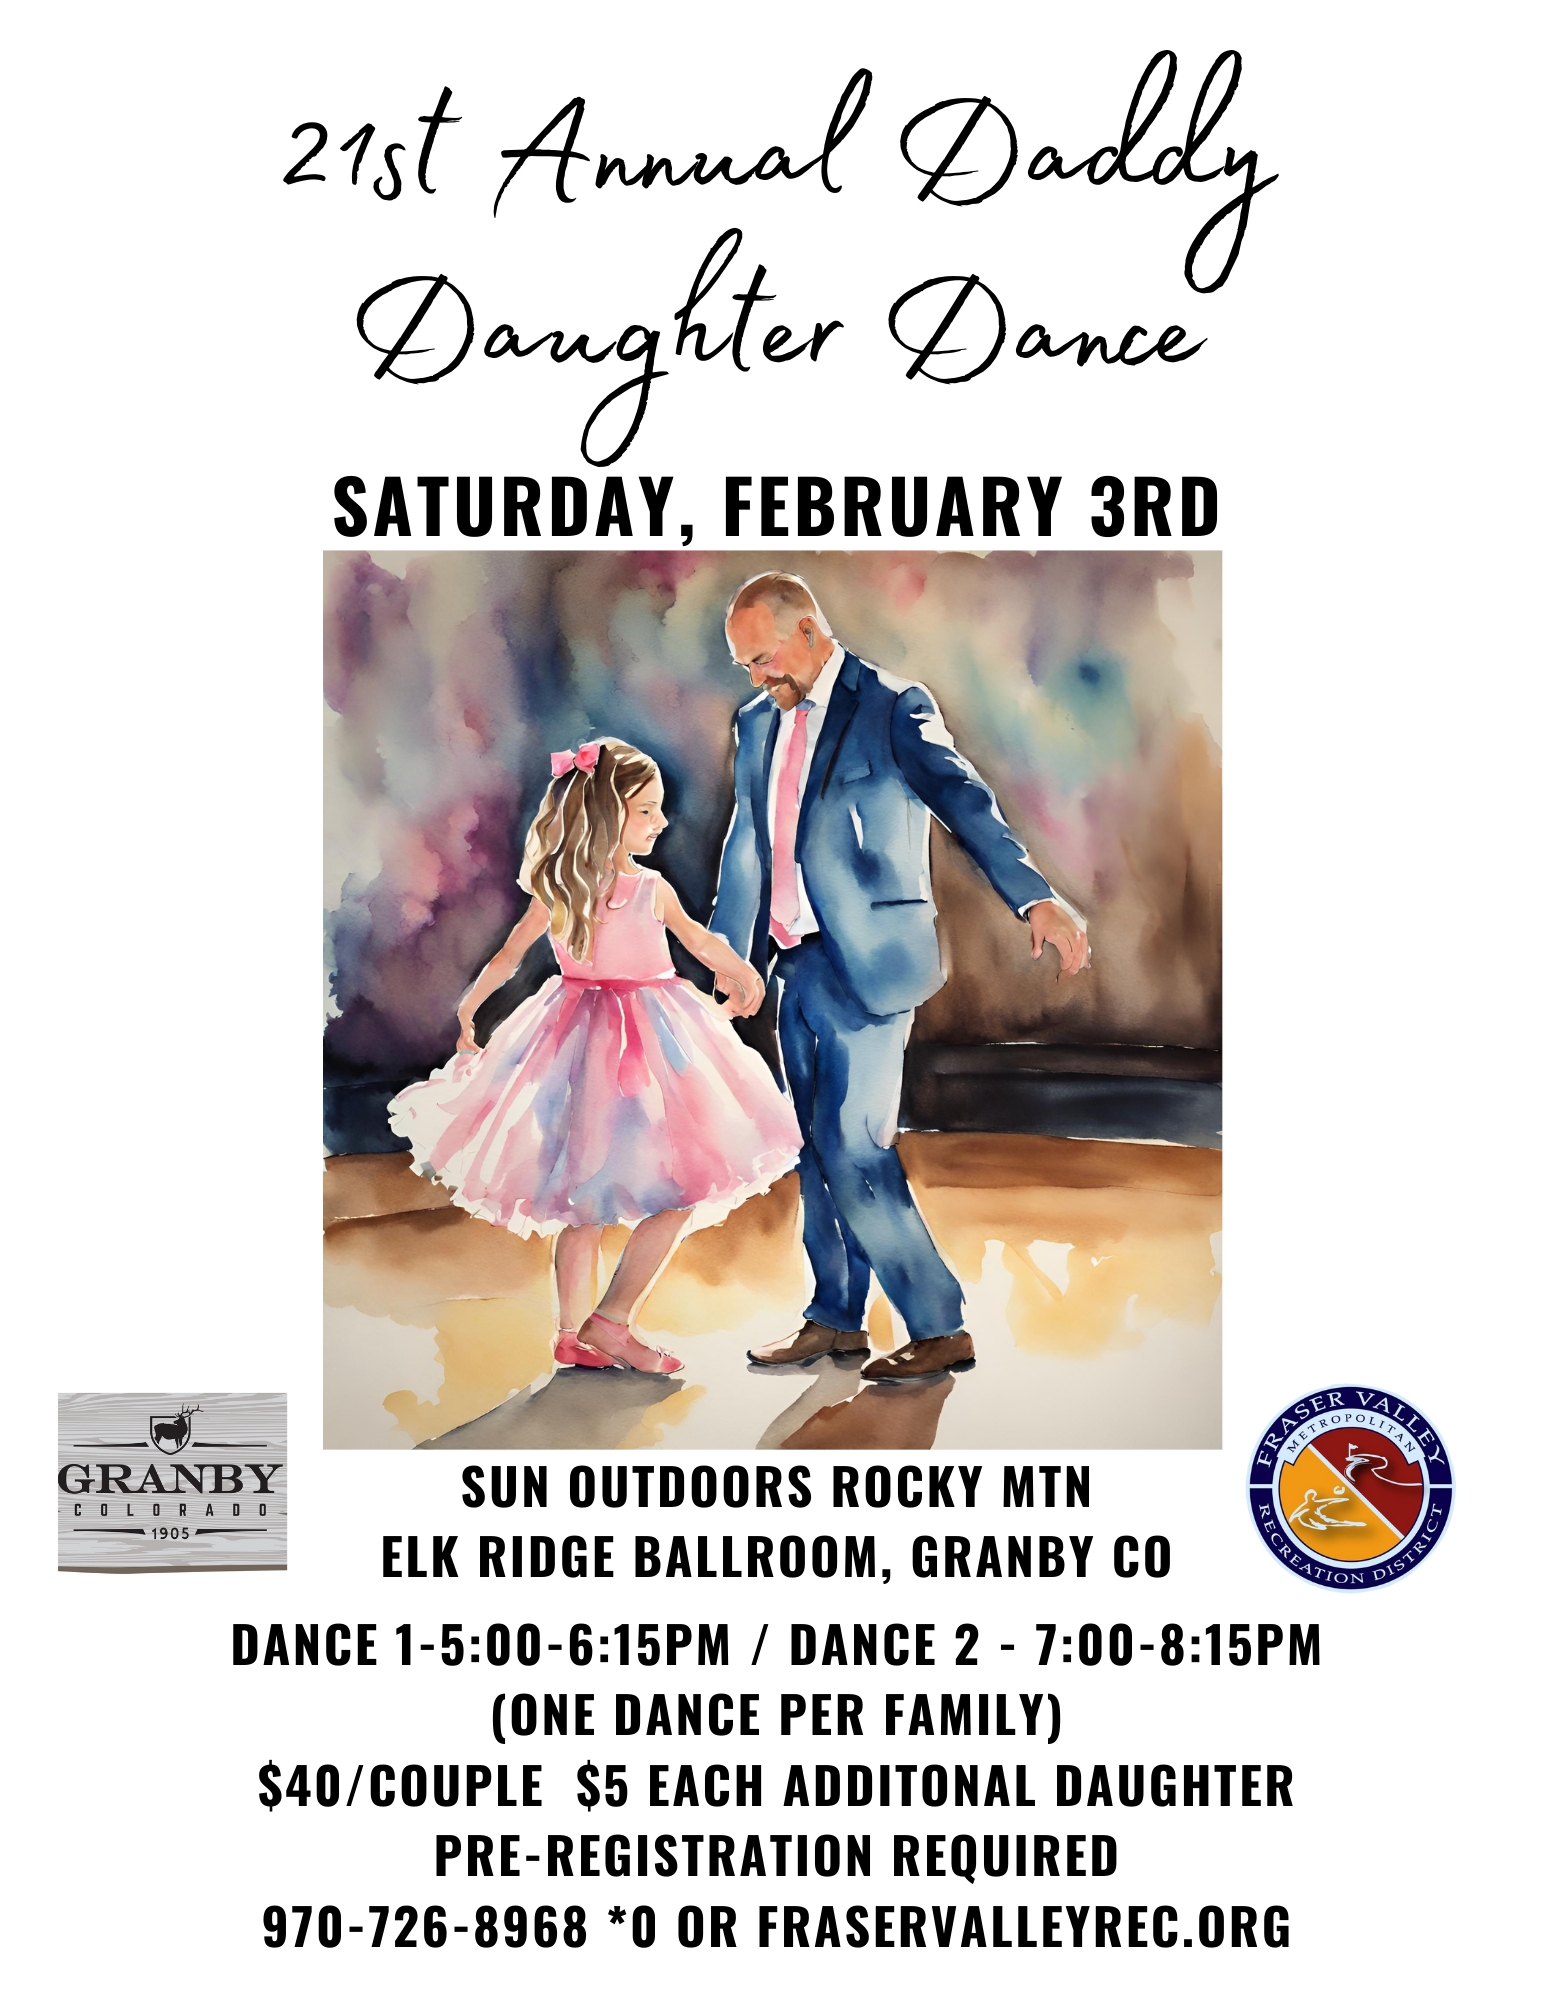 Promotional poster for the 21st Annual Daddy Daughter Dance on Saturday, February 3rd. The poster features a watercolor illustration of a father in a suit dancing with his young daughter in a pink dress. The event is at the Elk Ridge Ballroom, Granby CO, hosted by Sun Outdoors Rocky Mtn and Fraser Valley Recreation District. Two dance sessions are available, one from 5:00-6:15 PM and the other from 7:00-8:15 PM, with only one dance per family. The cost is $40 per couple and $5 for each additional daughter, with pre-registration required. Contact information includes a phone number, 970-726-8968 *0, and a website, fraservalleyrec.org. The Granby Colorado and Fraser Valley Recreation District logos are at the bottom.